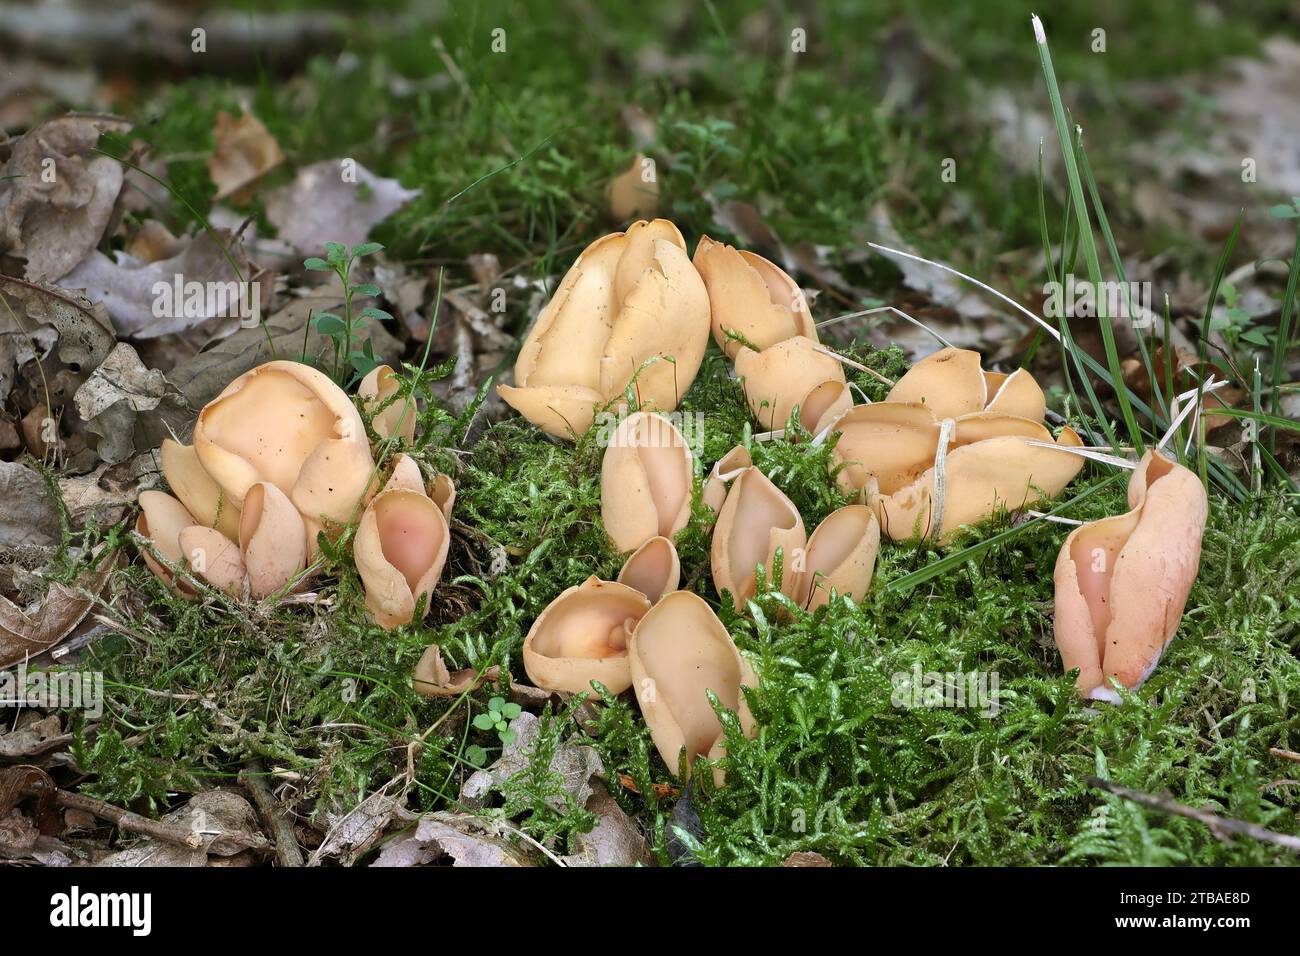 hare's ear (Otidea onotica), fruiting bodies on mossy forest ground, Germany, Mecklenburg-Western Pomerania Stock Photo